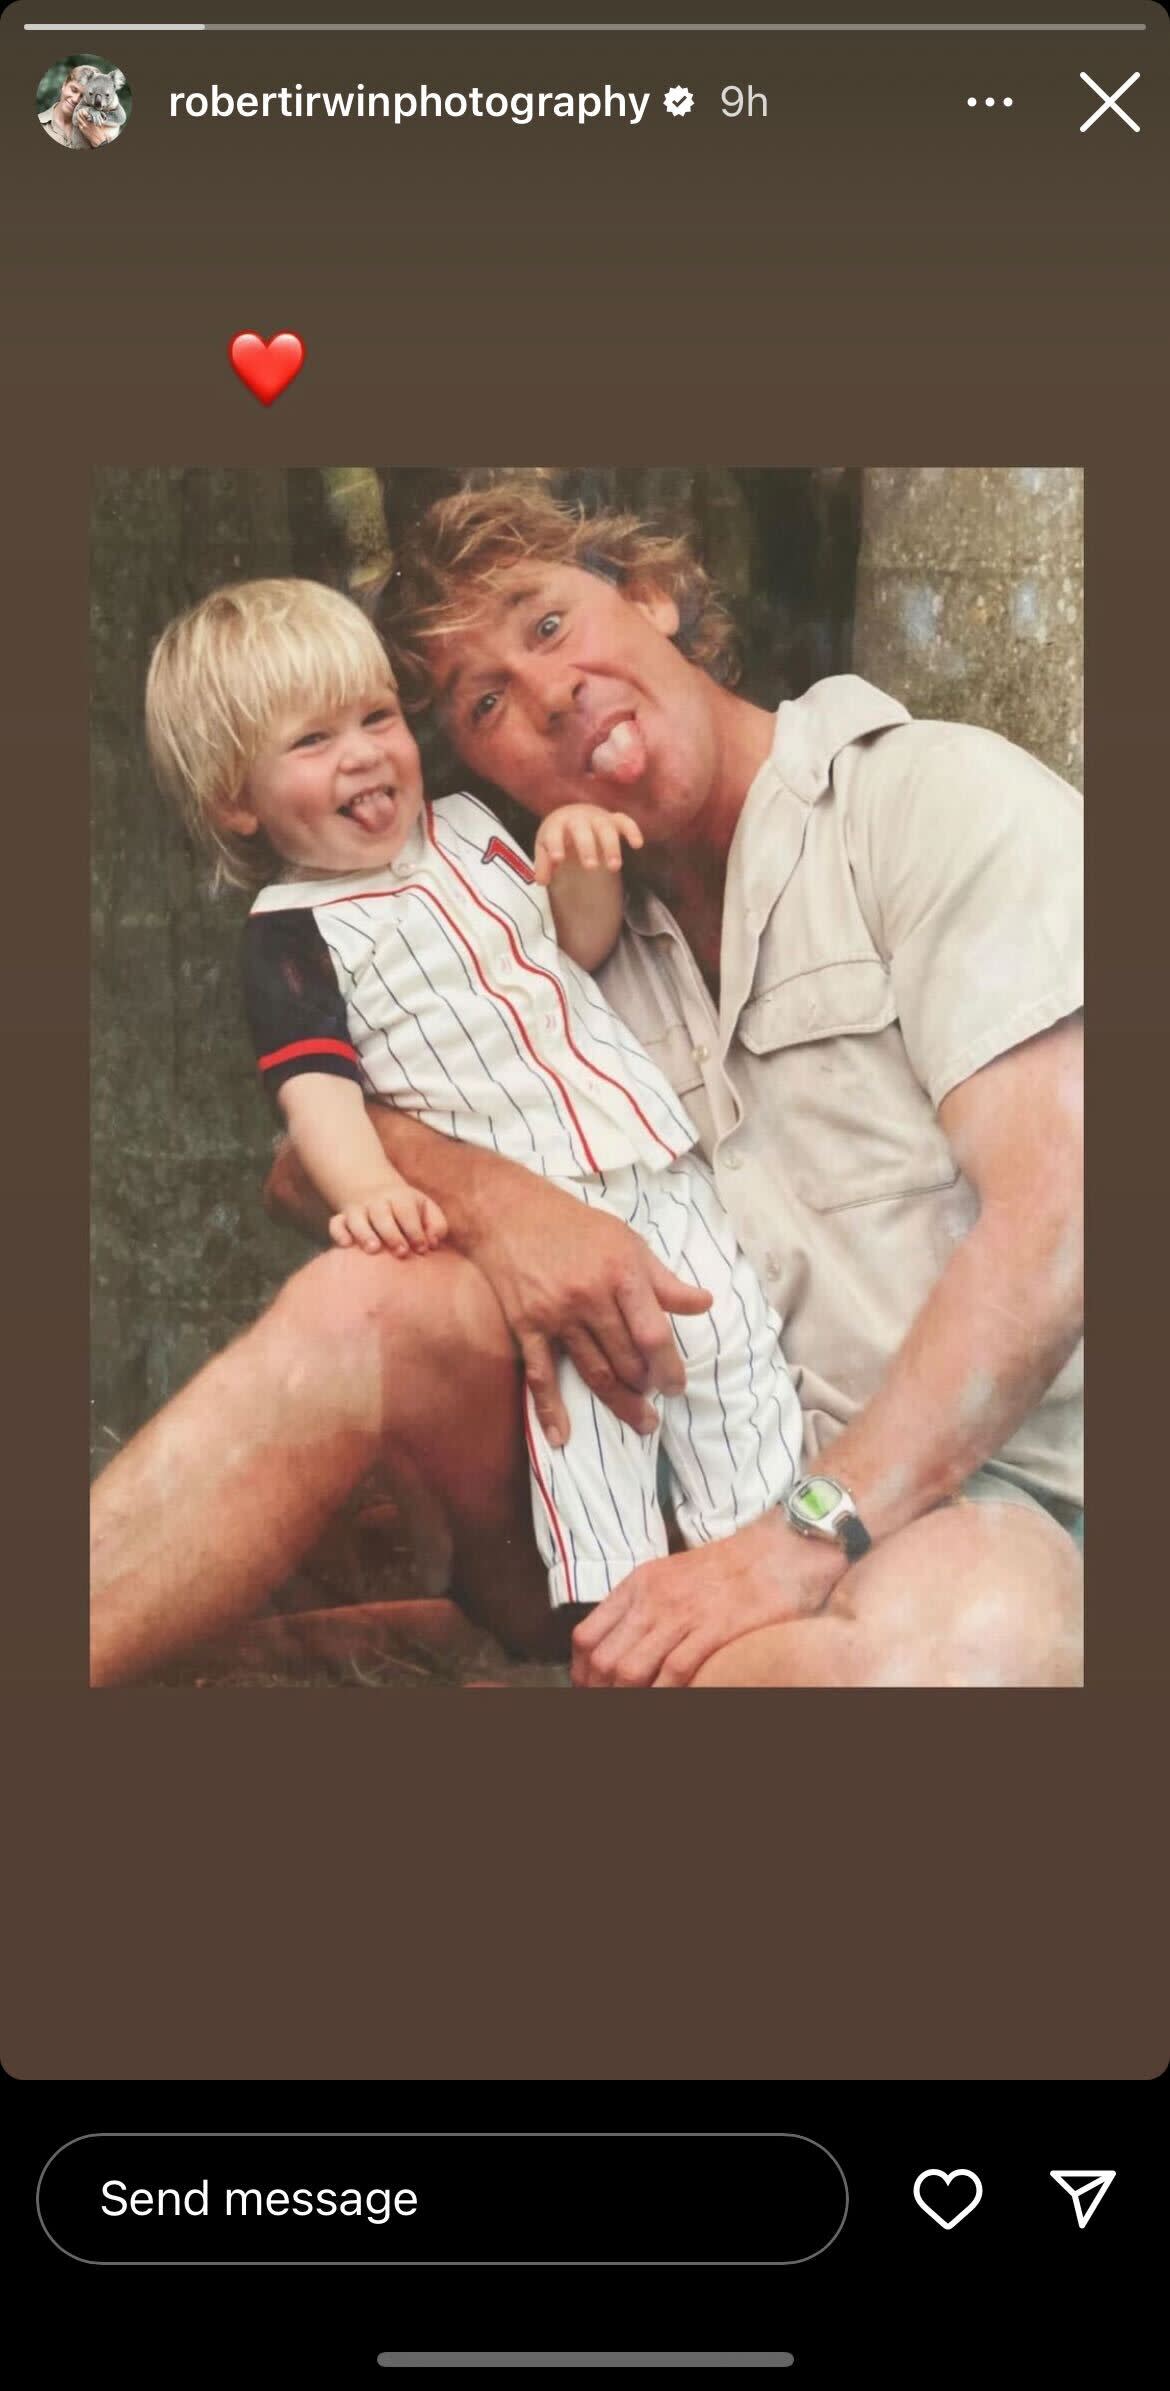 The late Steve Irwin poses with his son Robert Irwin in a throwback photo. (Robert Irwin/Instagram)